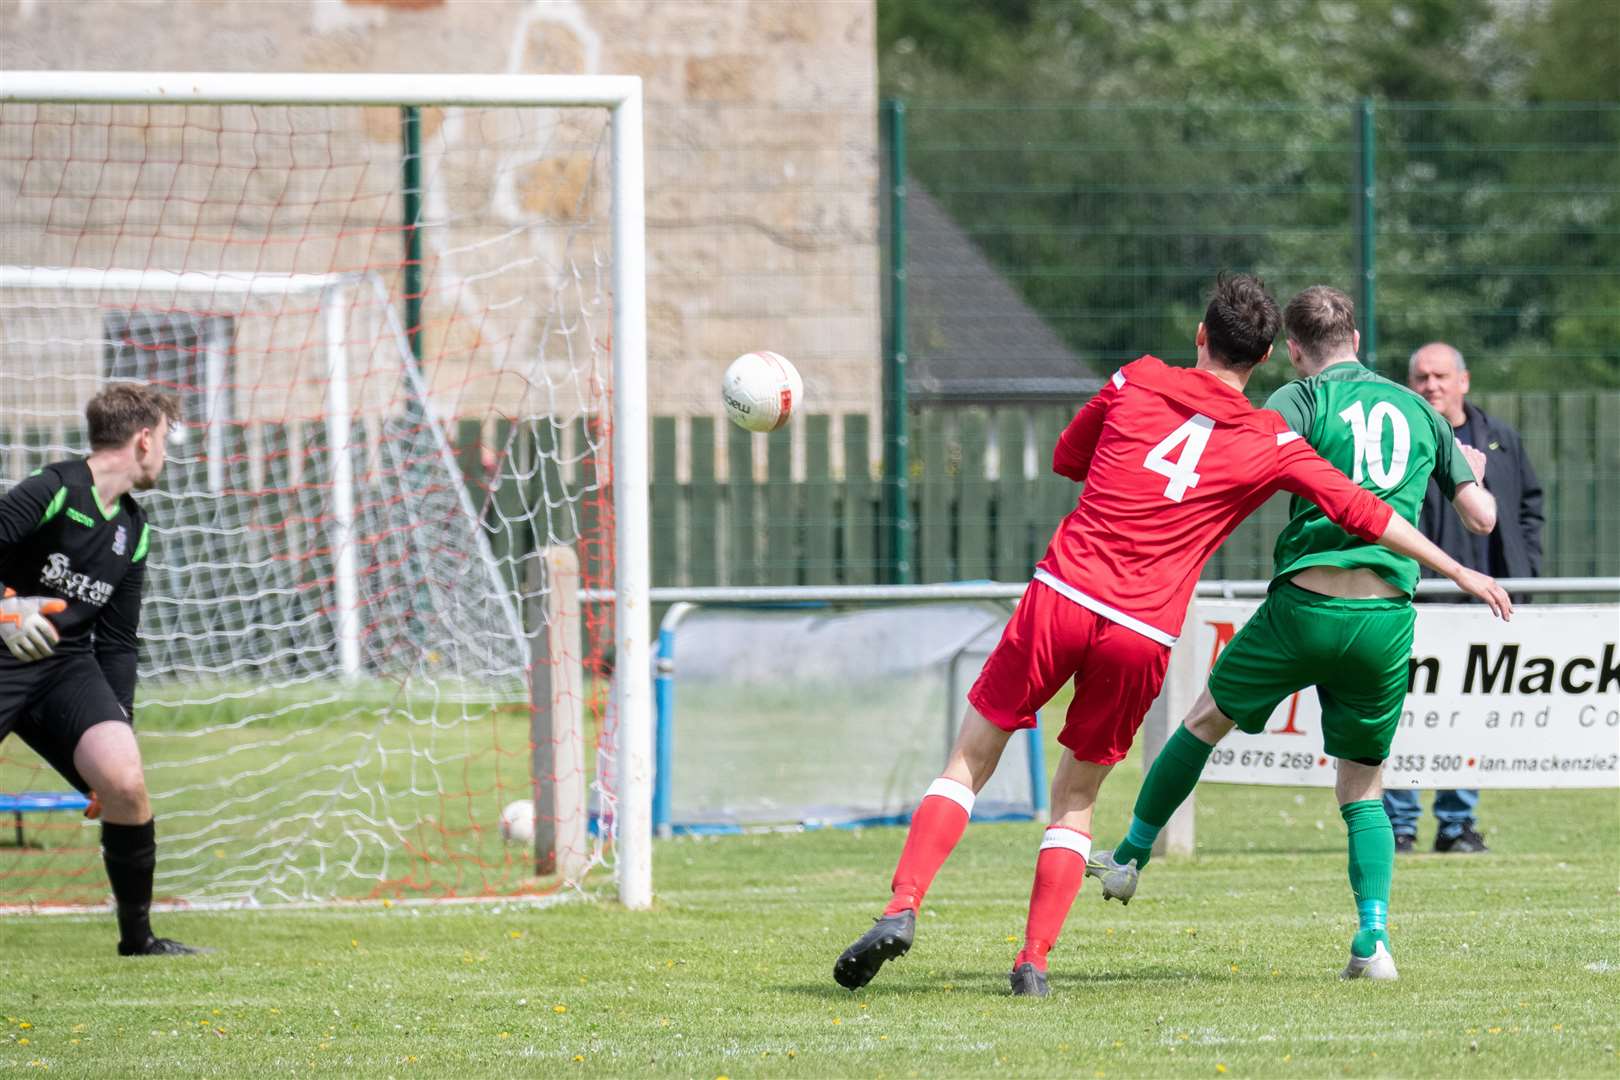 Forres goalkeeper Daniel McLeod is rooted to the spot as Dufftown #10 Ben Cullen scores the opener...Dufftown FC (2) vs Forres Thistle FC (2) - Dufftown FC win 5-3 on penalties - Elginshire Cup Final held at Logie Park, Forres 14/05/2022...Picture: Daniel Forsyth..